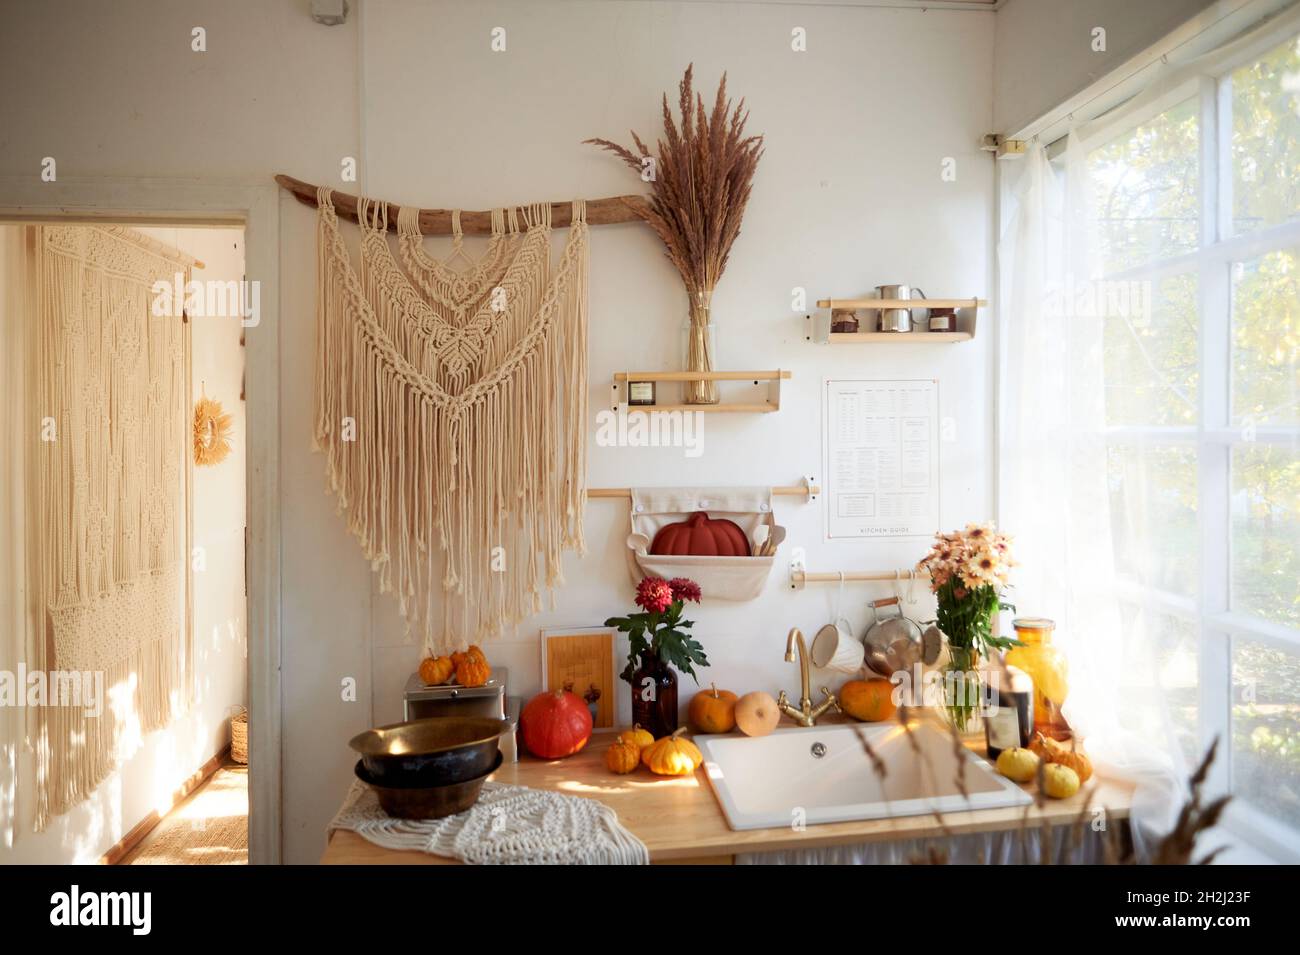 Cozy rustic kitchen with large window and lace curtains. On the wall hangs a large macrame, pumpkins, cereals Stock Photo